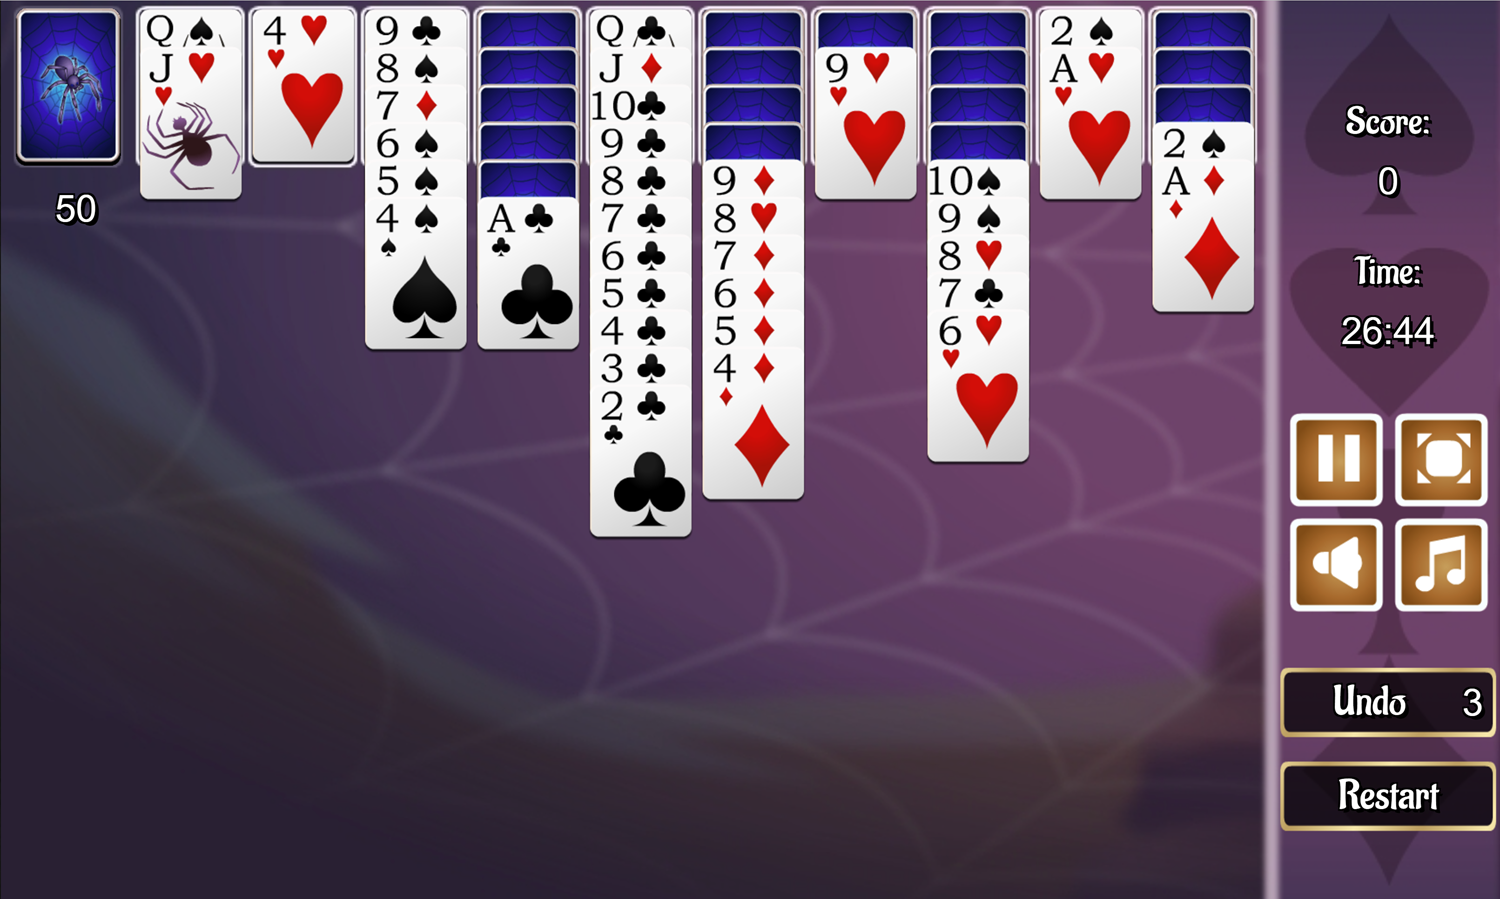 4 Suits Spider Solitaire Game Screenshot.